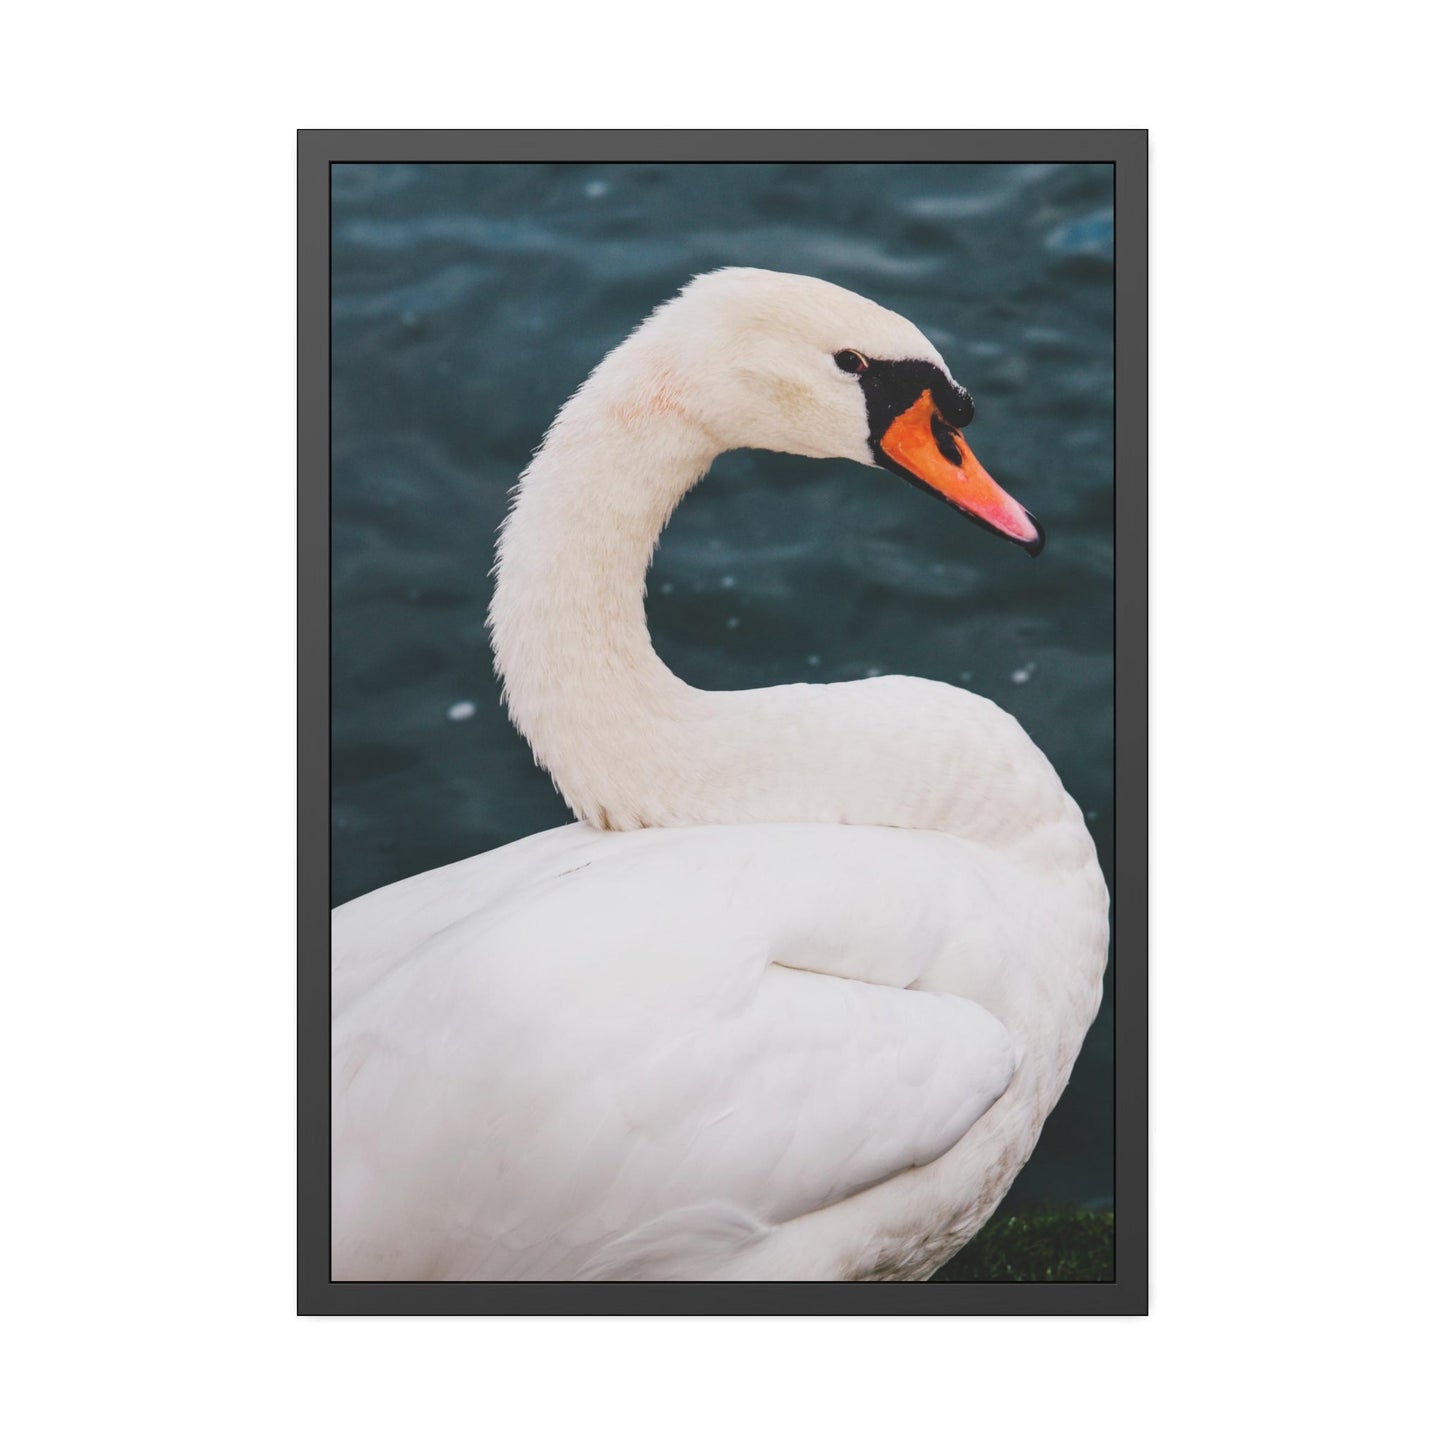 The Calm of Nature: Natural Canvas Print of Swan in a Serene Landscape